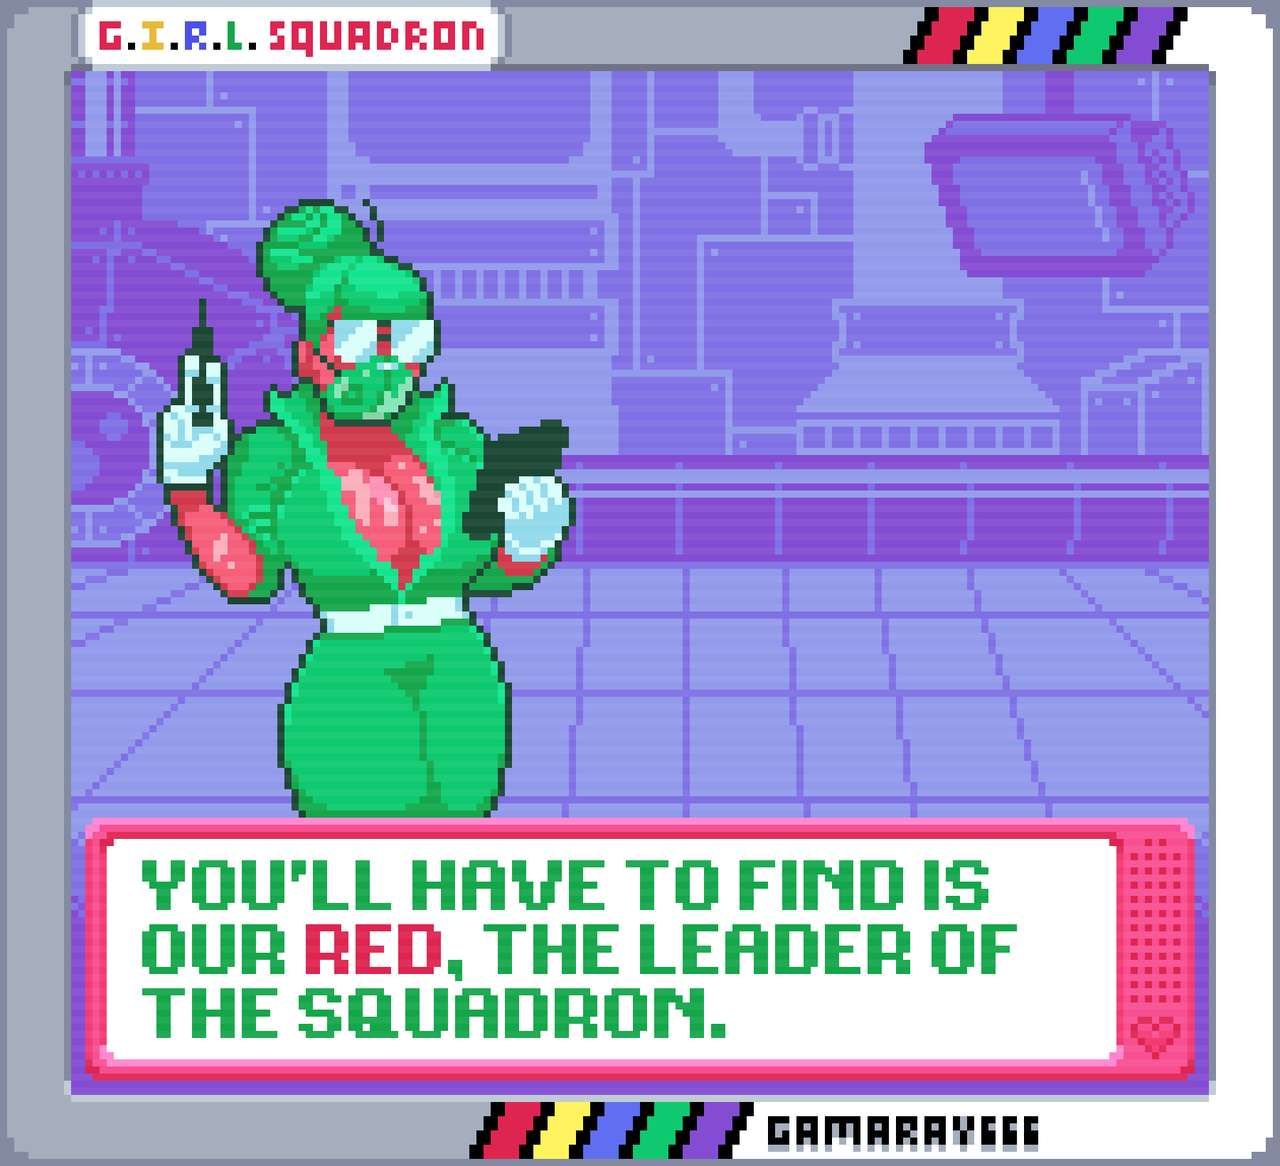 G. I. R. L. SQUADRON - A Choose Your Own Adventure 11